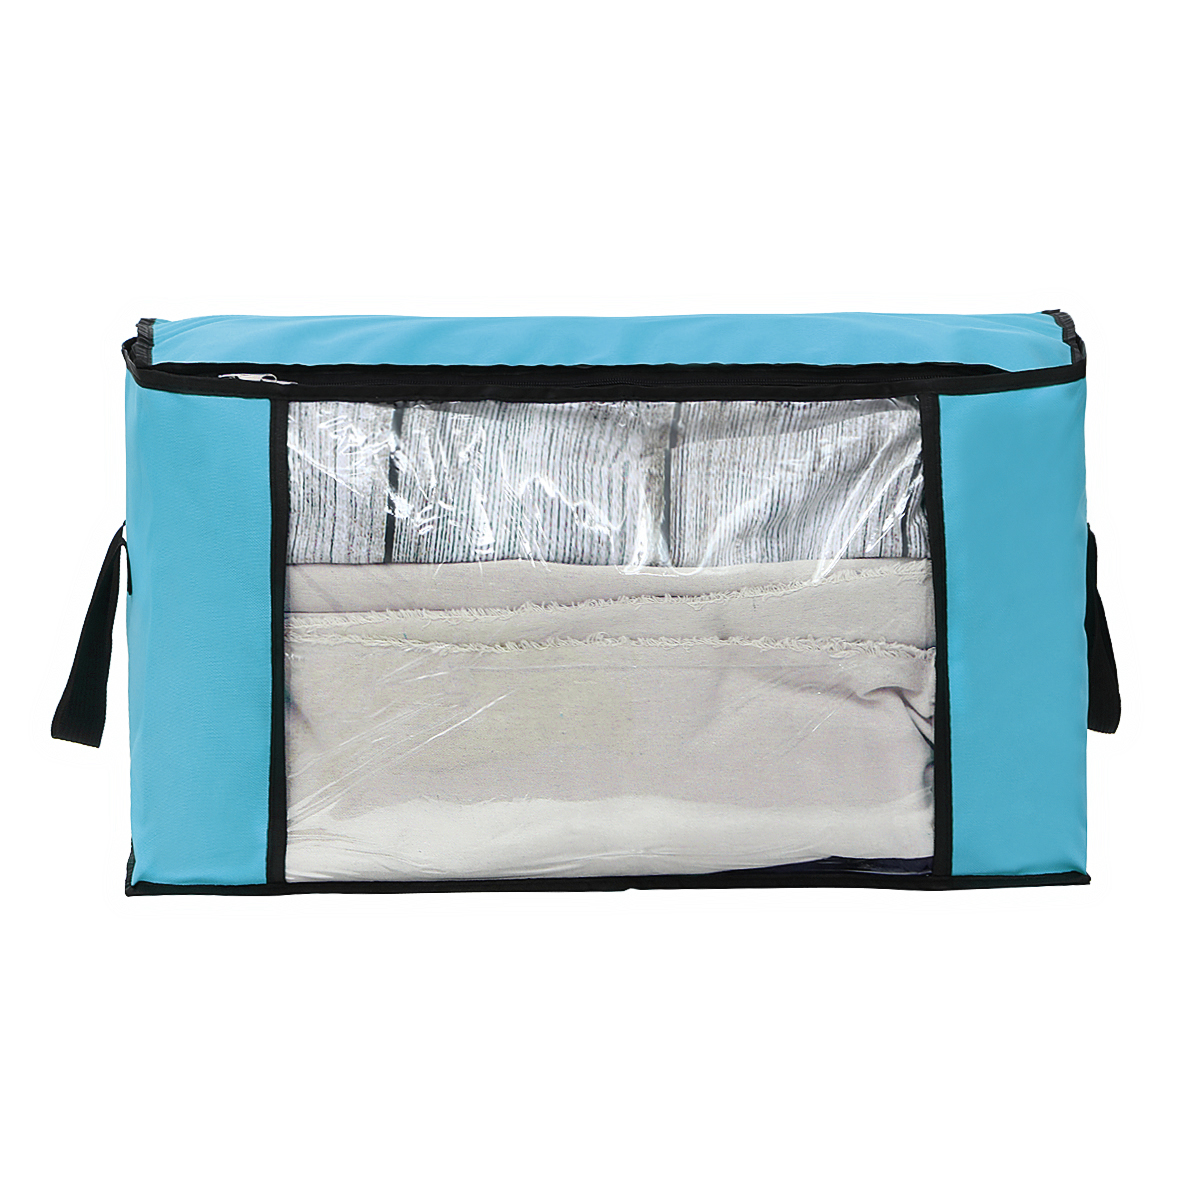 KING-DO-WAY-34-Pcs-90L-Clothing-Storage-Bags-Zipped-Clothes-Organizers-Quilts-Blankets-Bedding-Handb-1855896-10